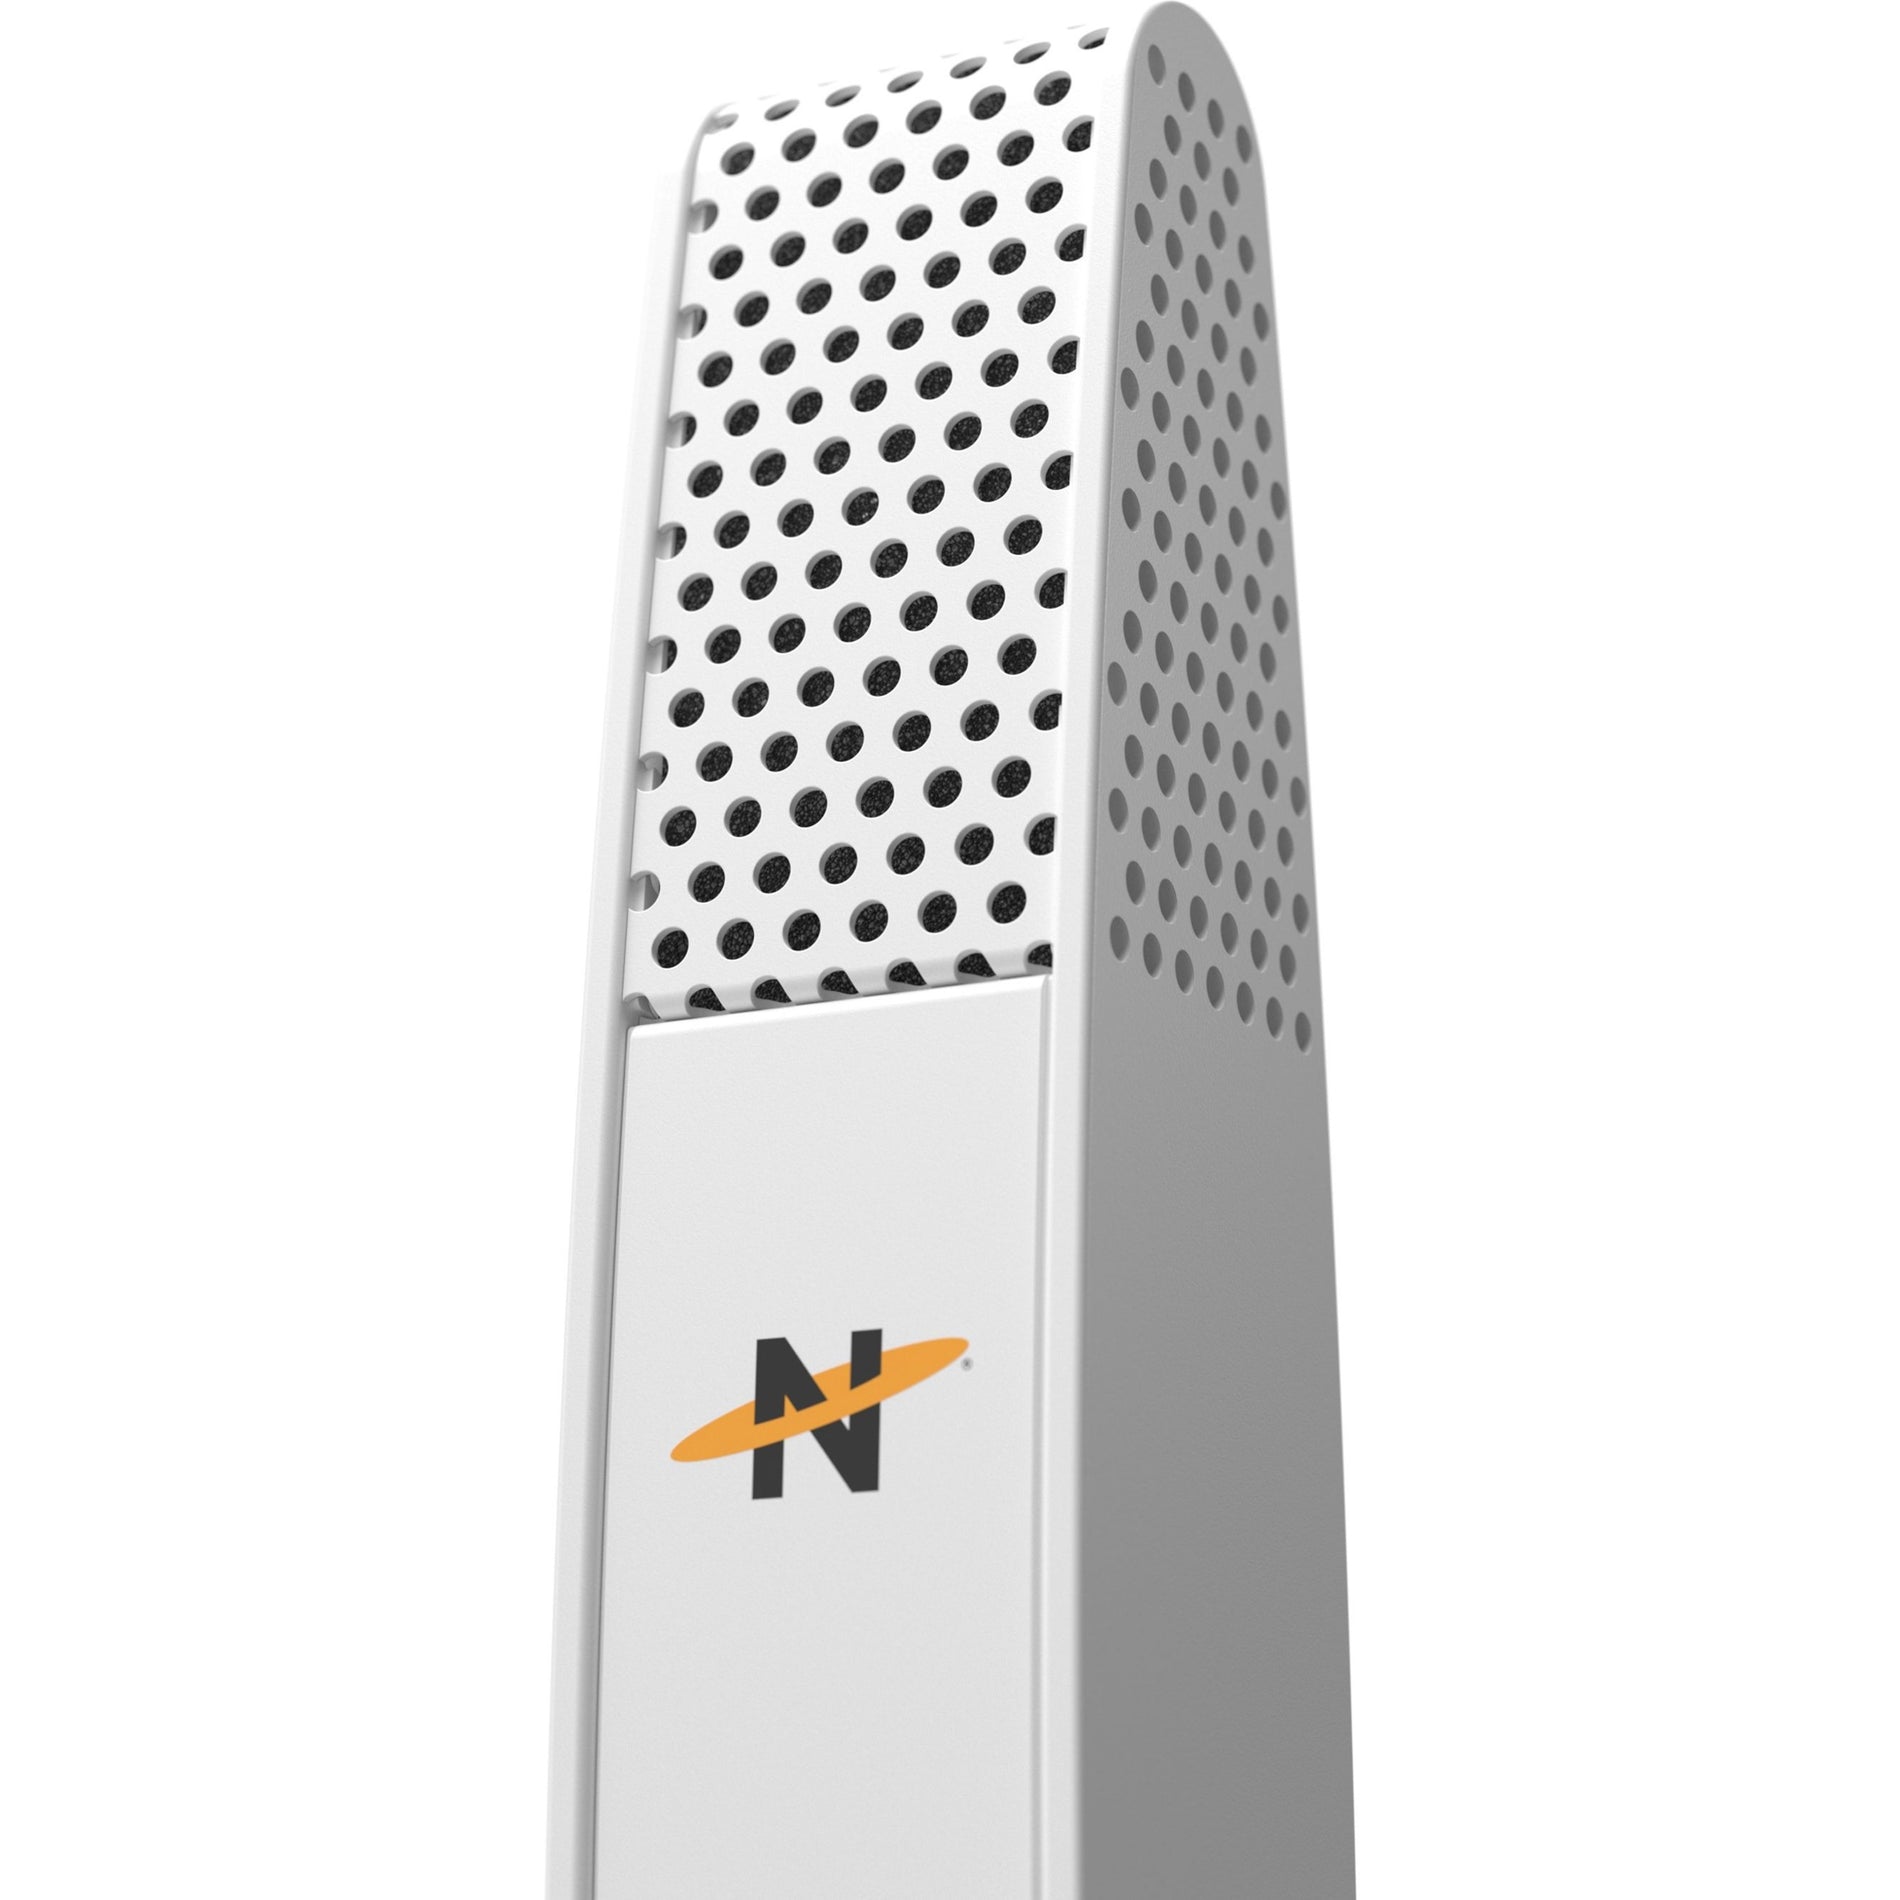 Neat Microphones MIC-1015-01 Neat Skyline SKYWHT Wired Condenser Microphone - White, 2 Year Warranty, Cardioid Directional, Desktop, USB Interface, Mute Control